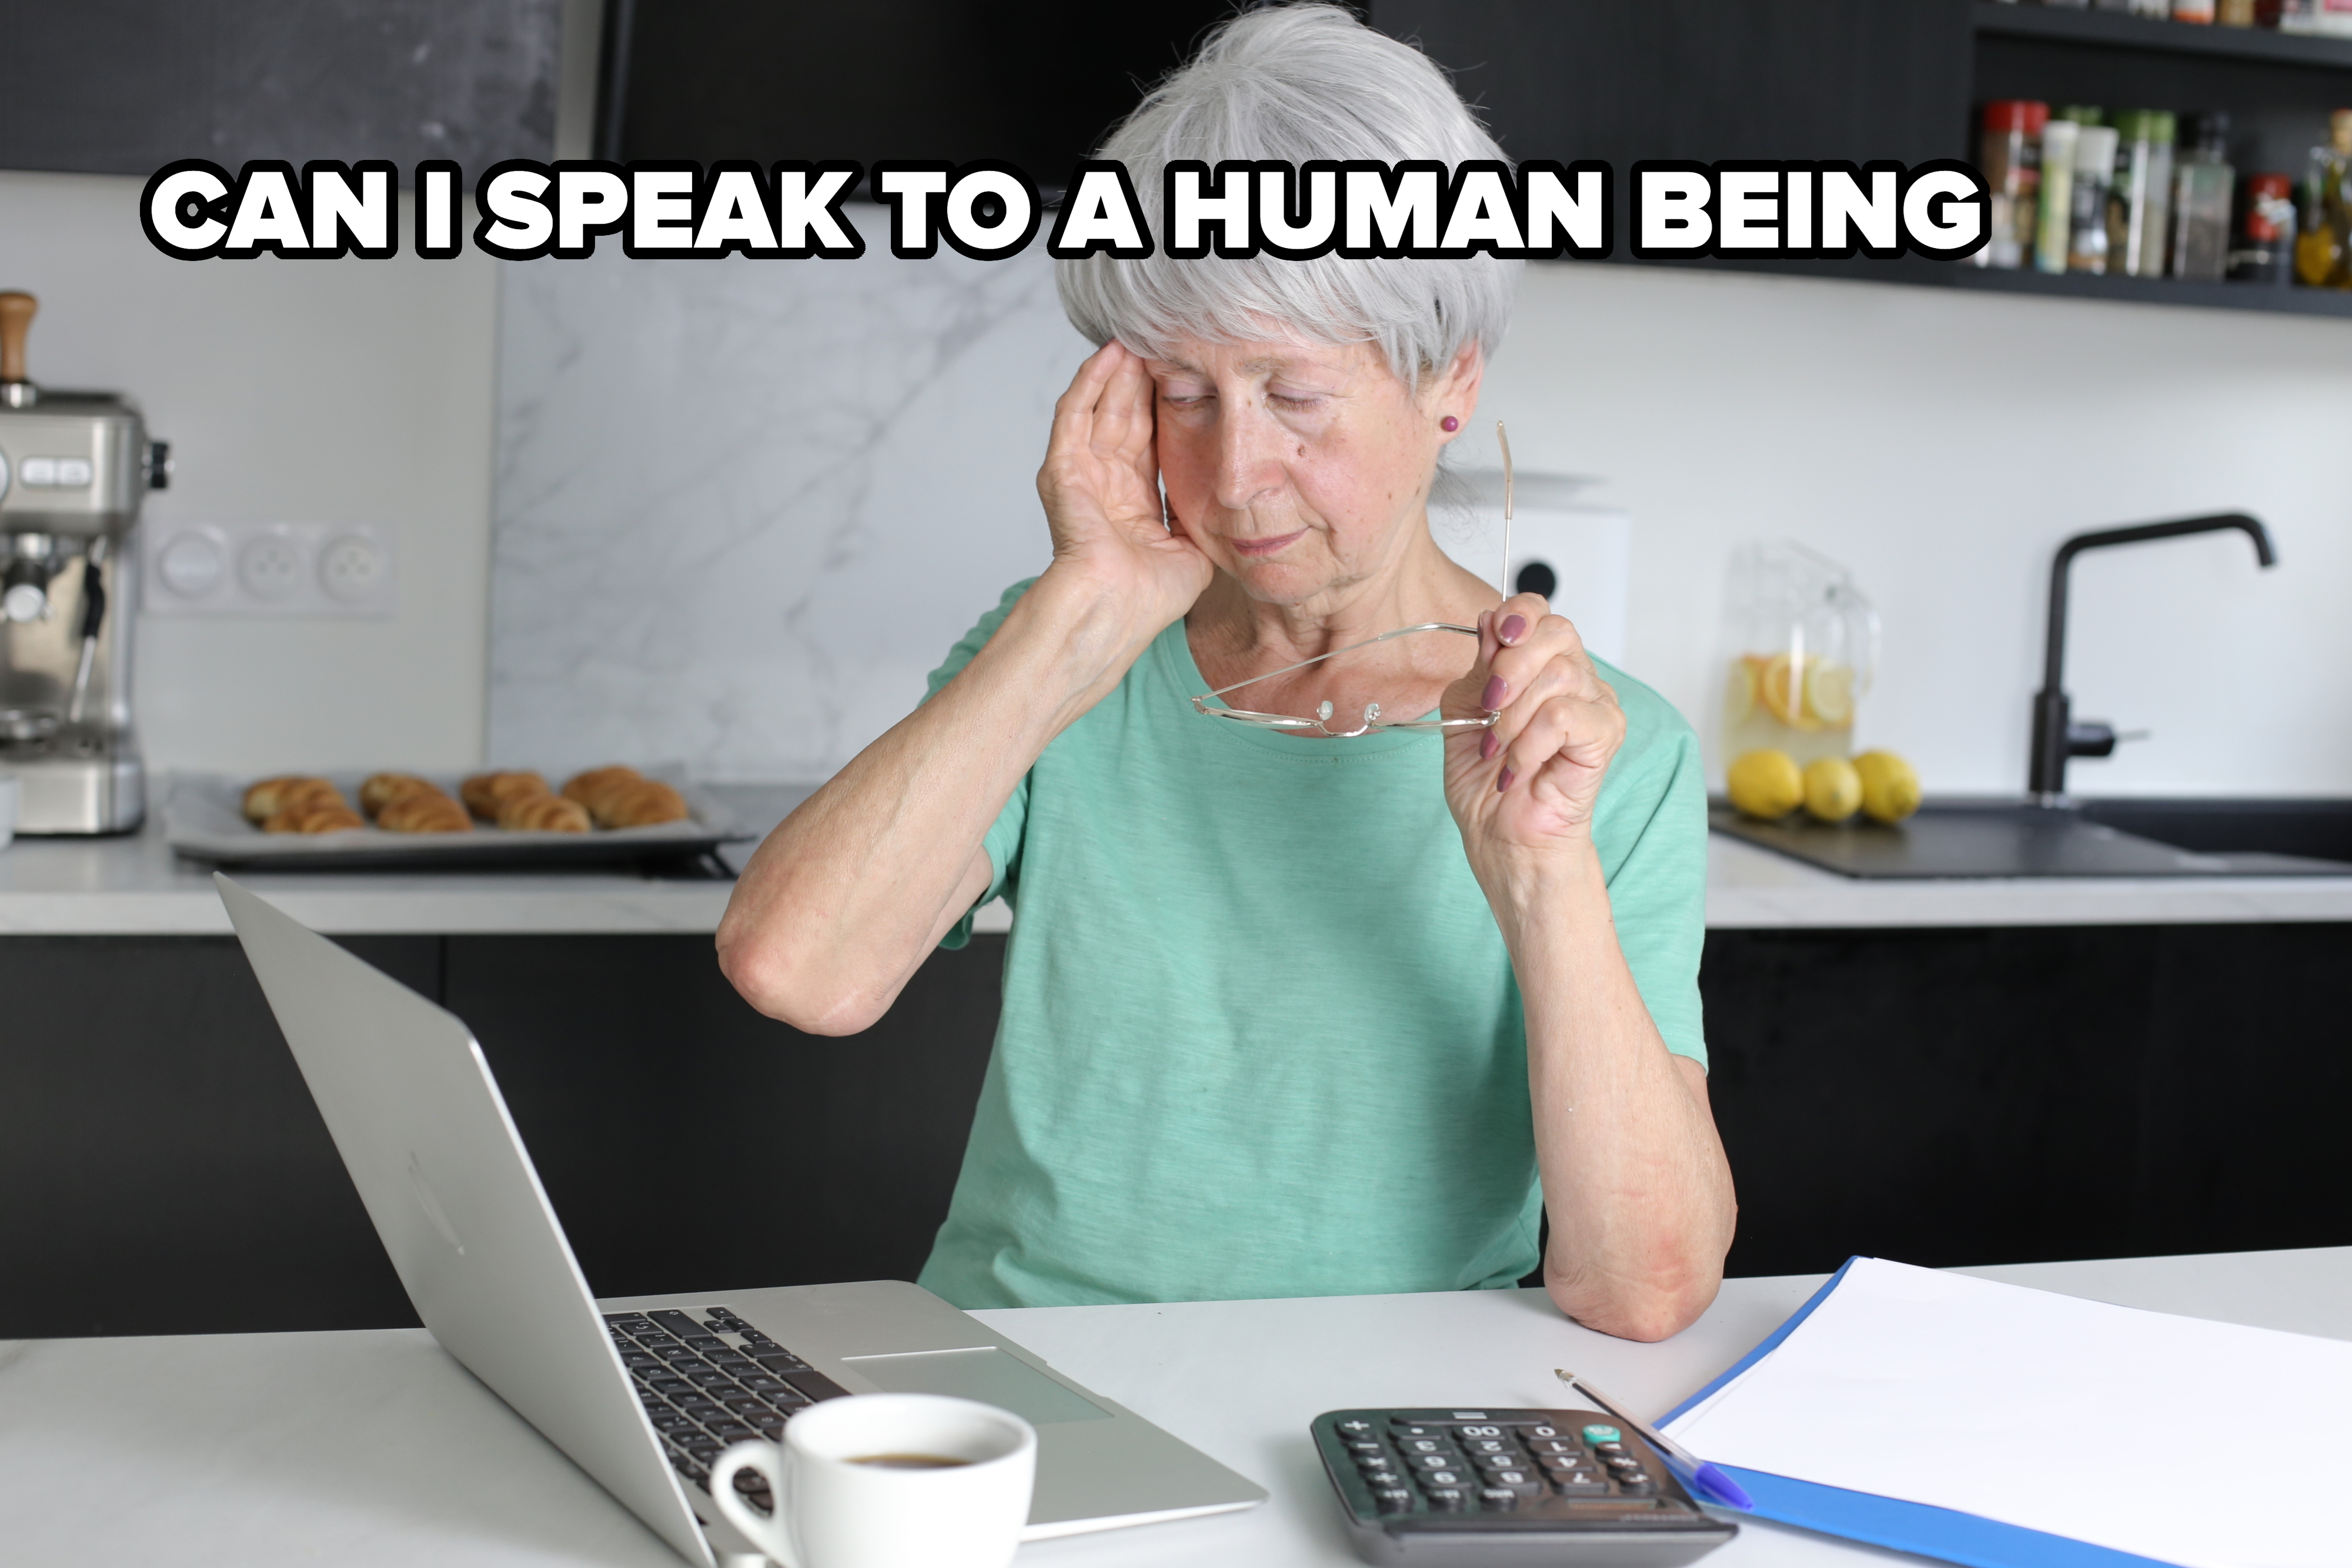 &quot;Can I speak to a human being&quot;